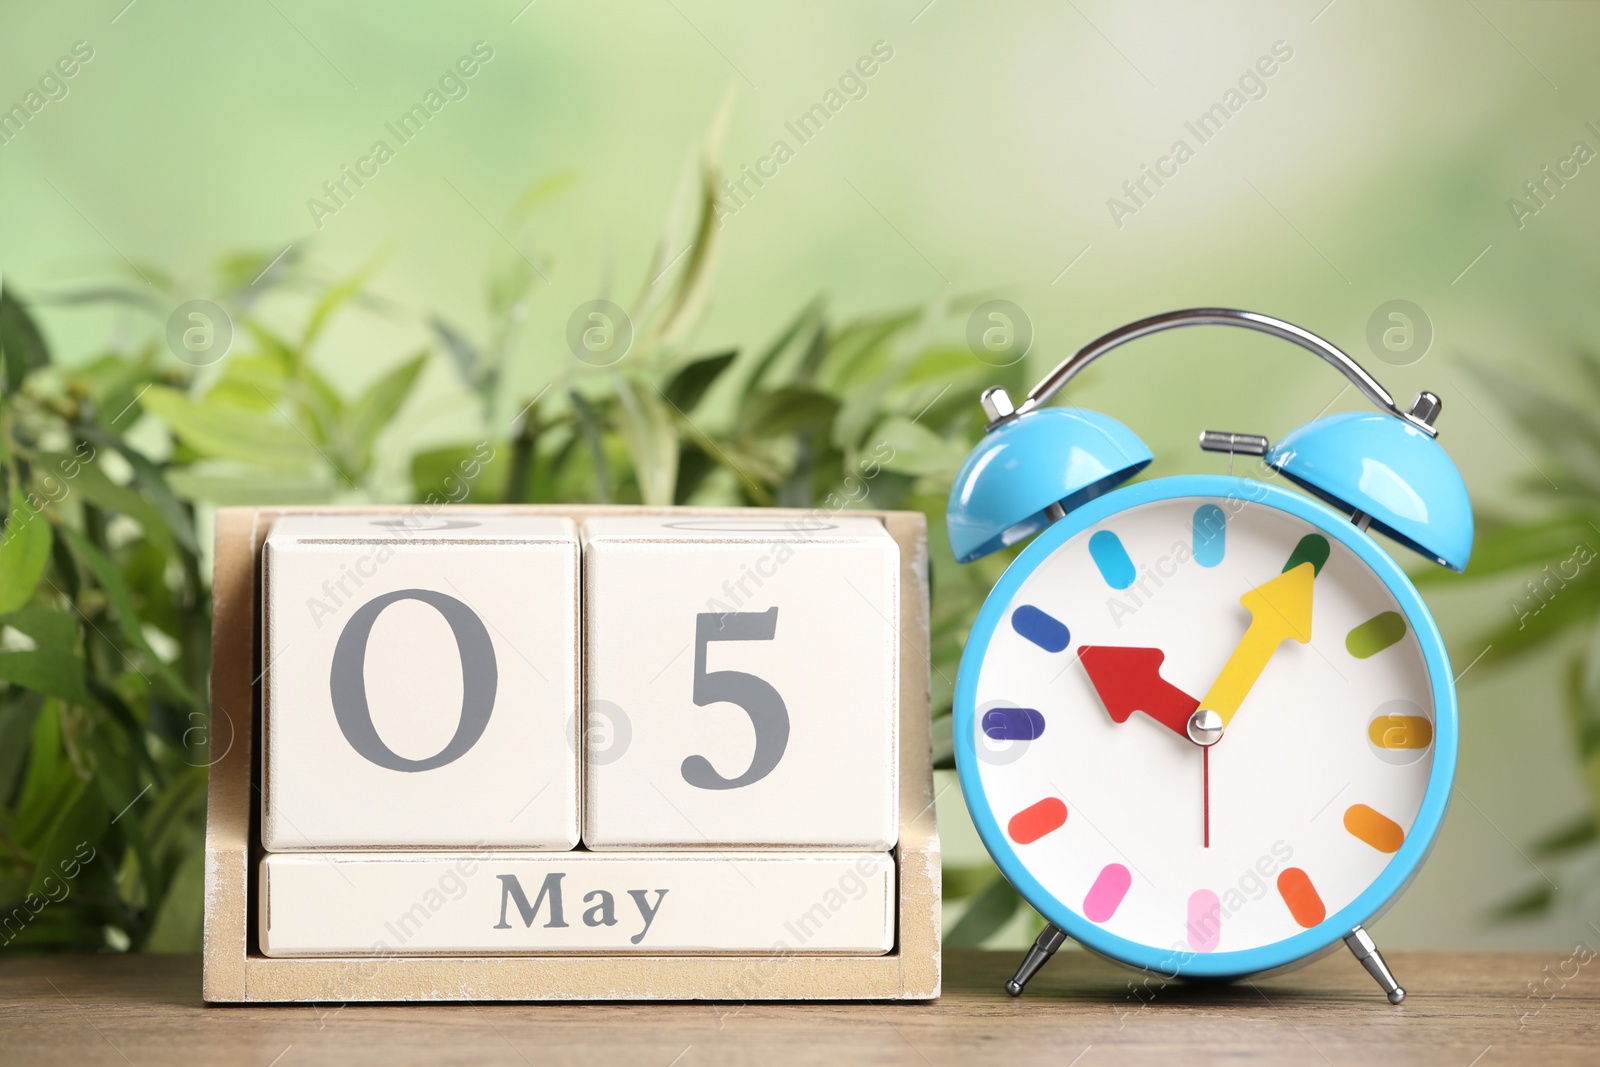 Photo of Wooden block calendar and alarm clock on table against blurred green background